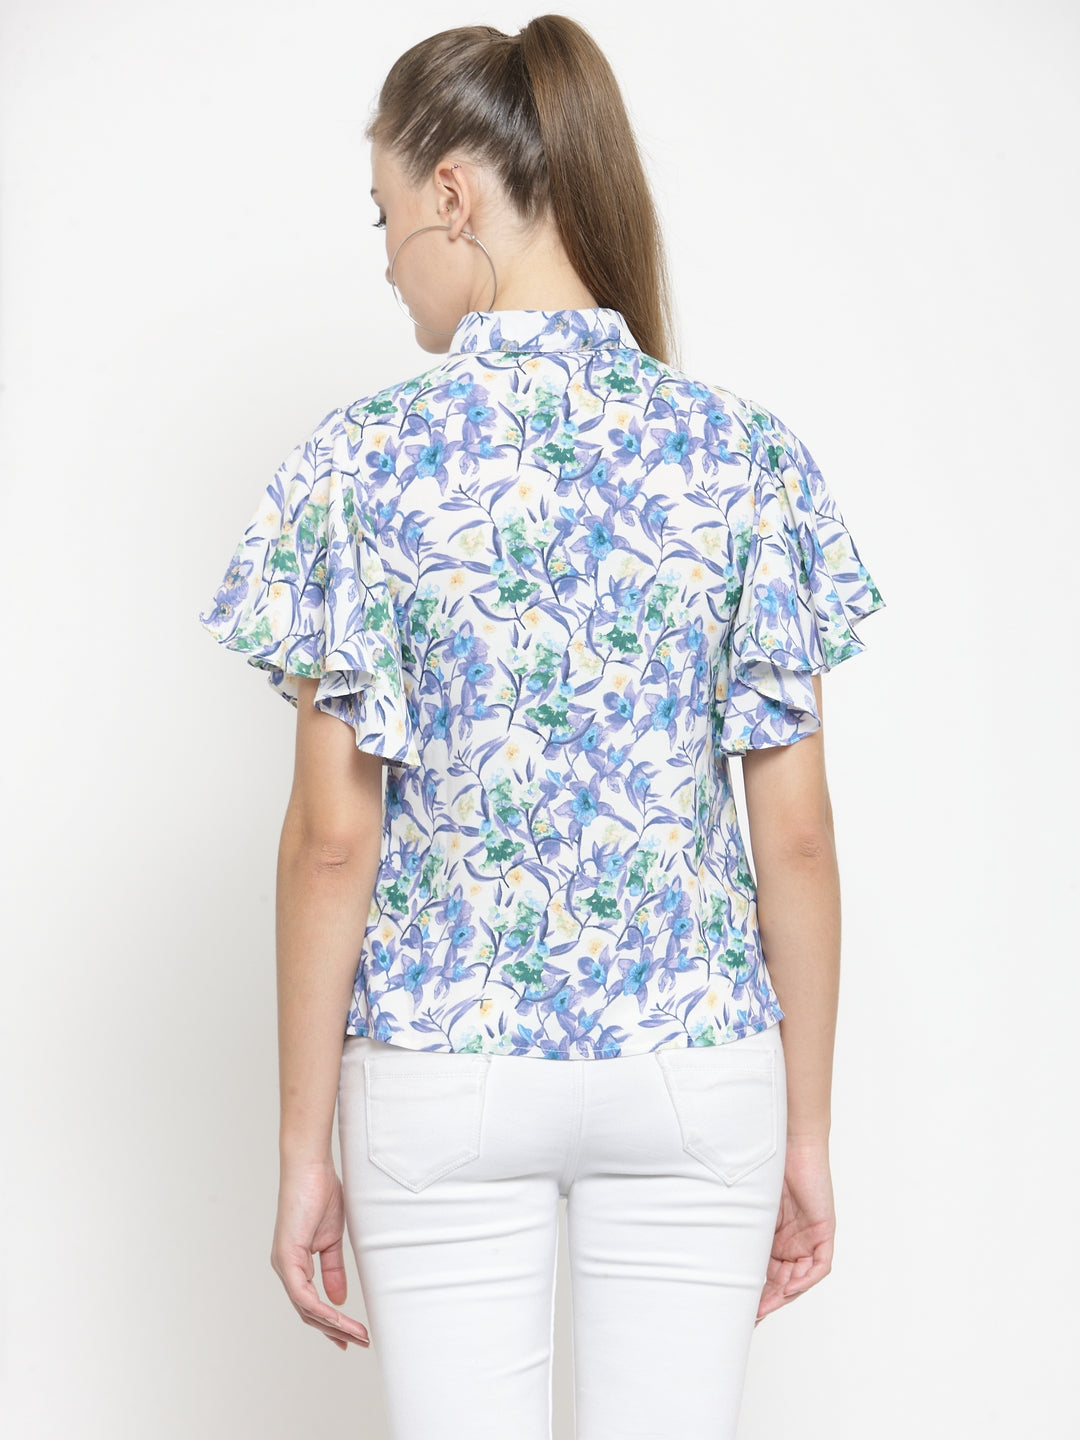 Print Blouse With Neck Cut